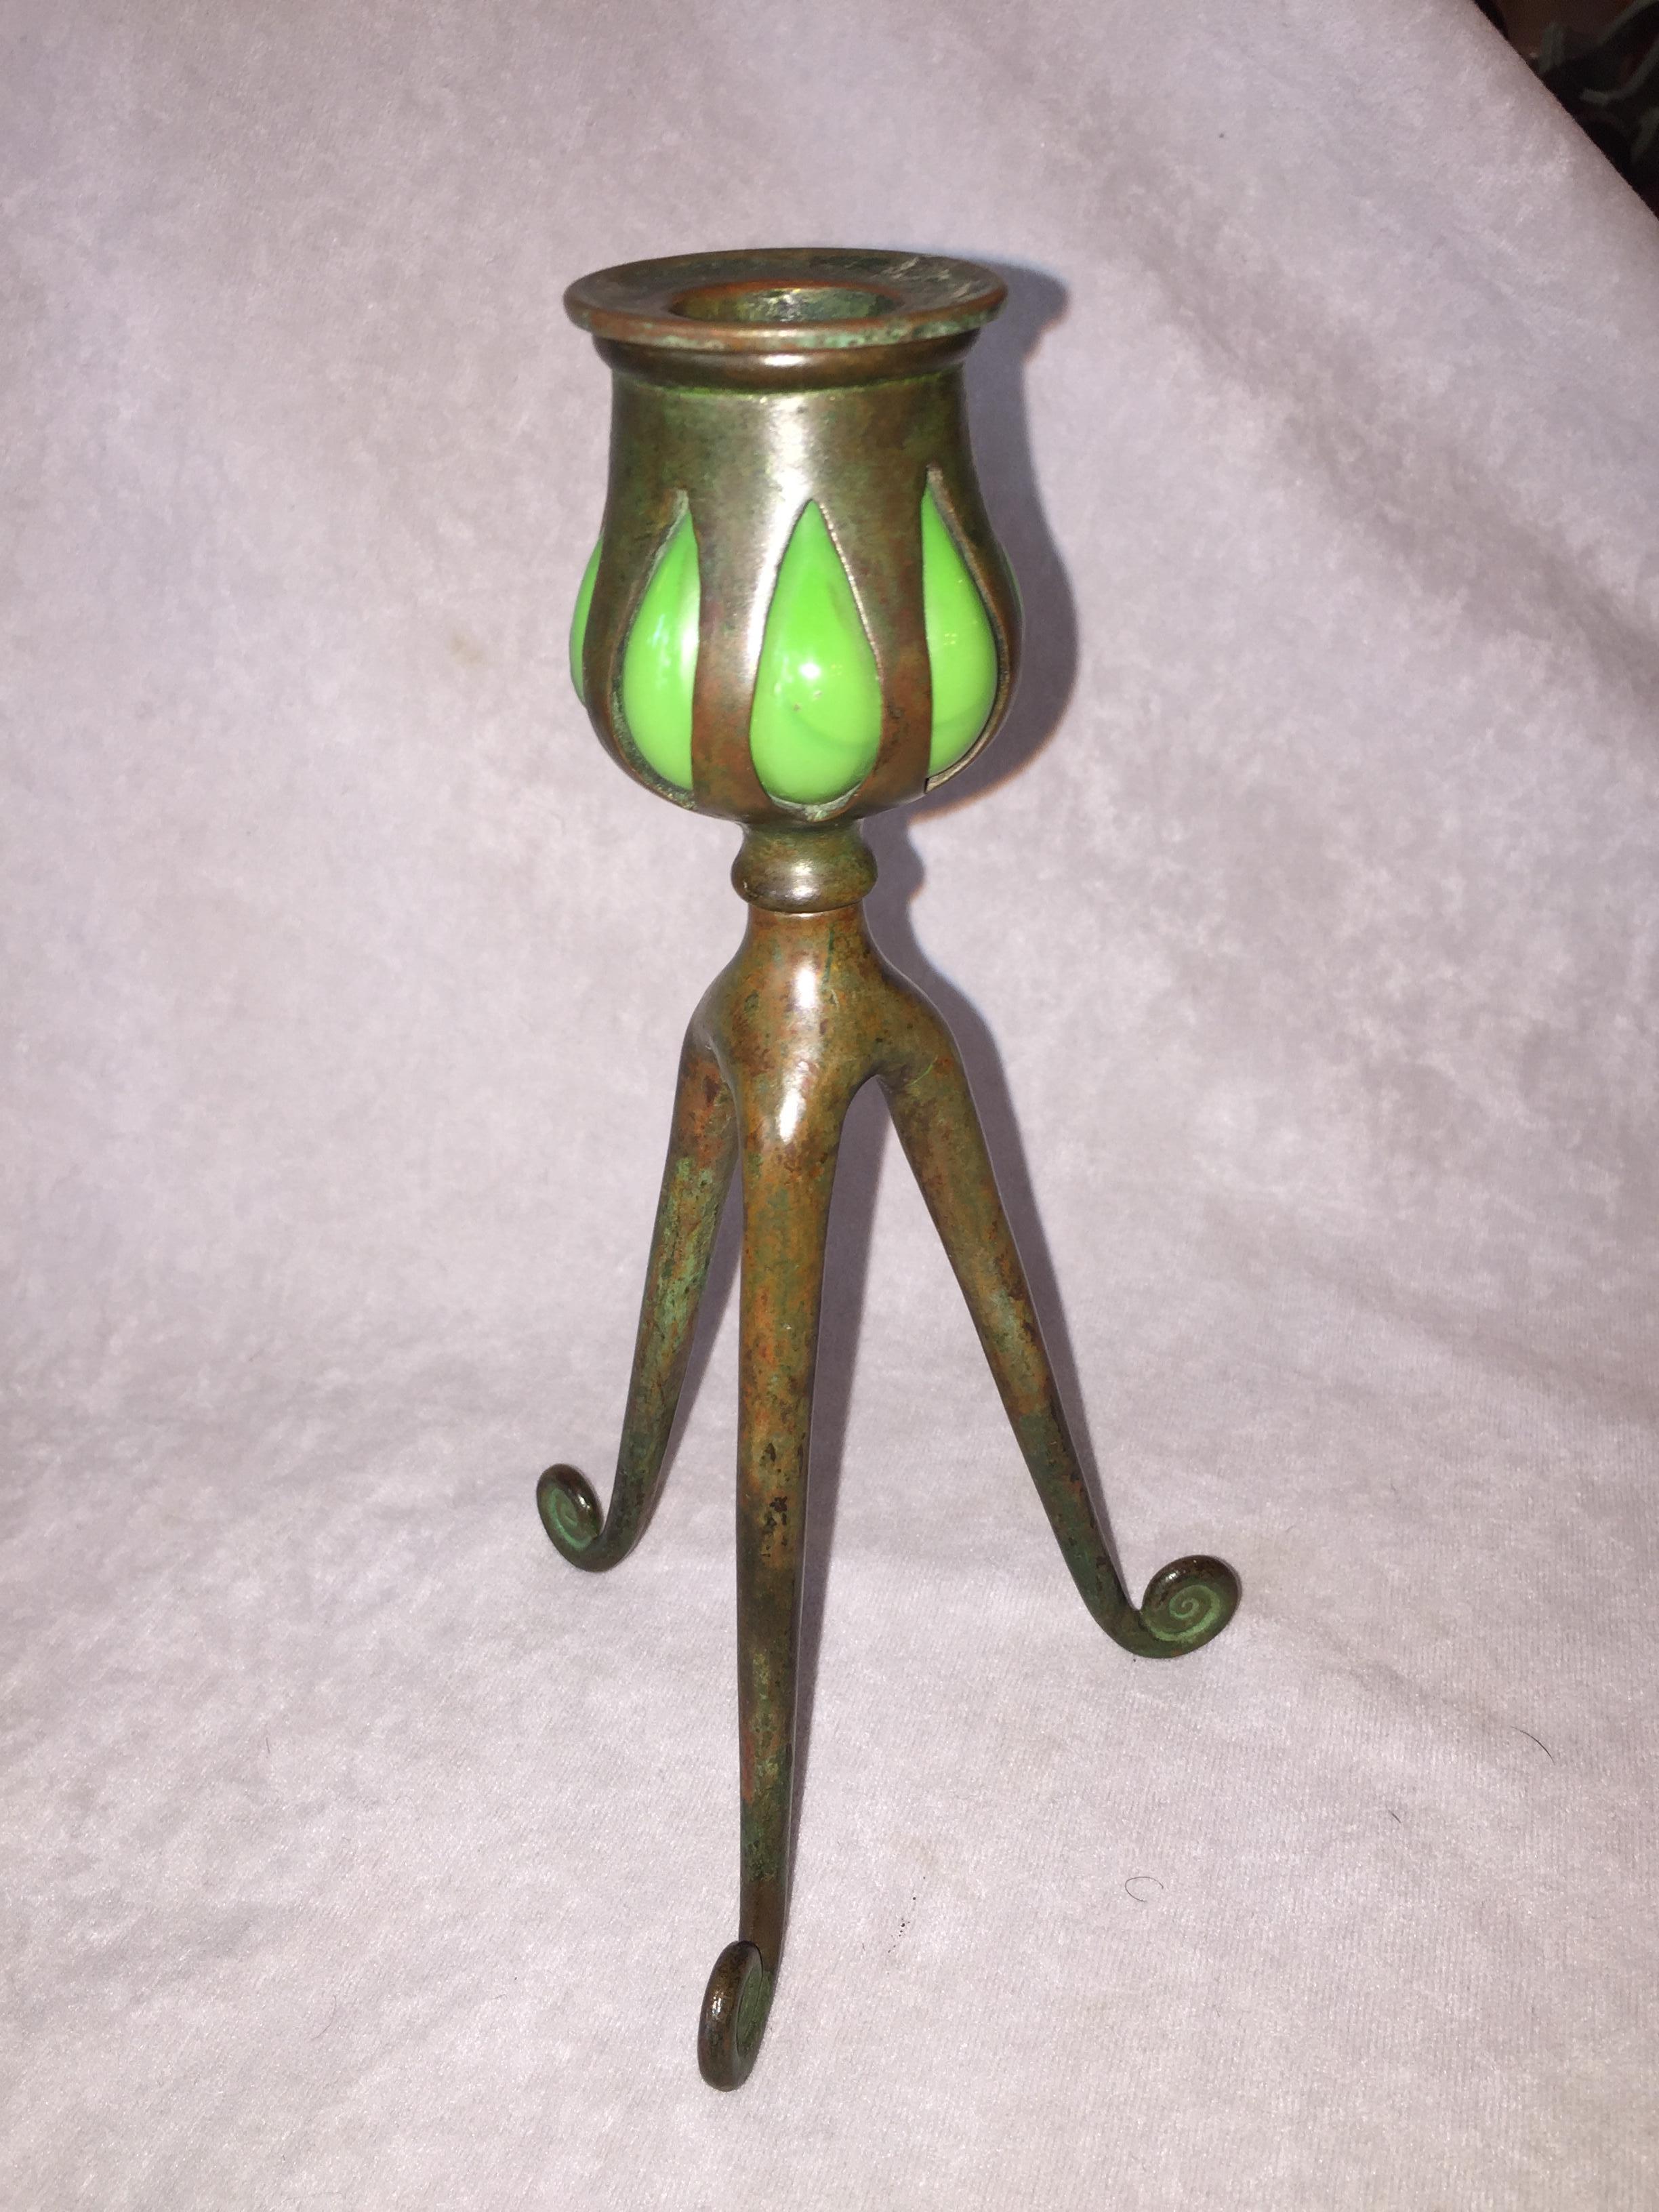 These charming little candlesticks were done by the most recognized maker of quality craftsmanship of the period, Tiffany Studios. Besides the famous leaded glass lamps that the studio produced, there were many other useful and interesting items for